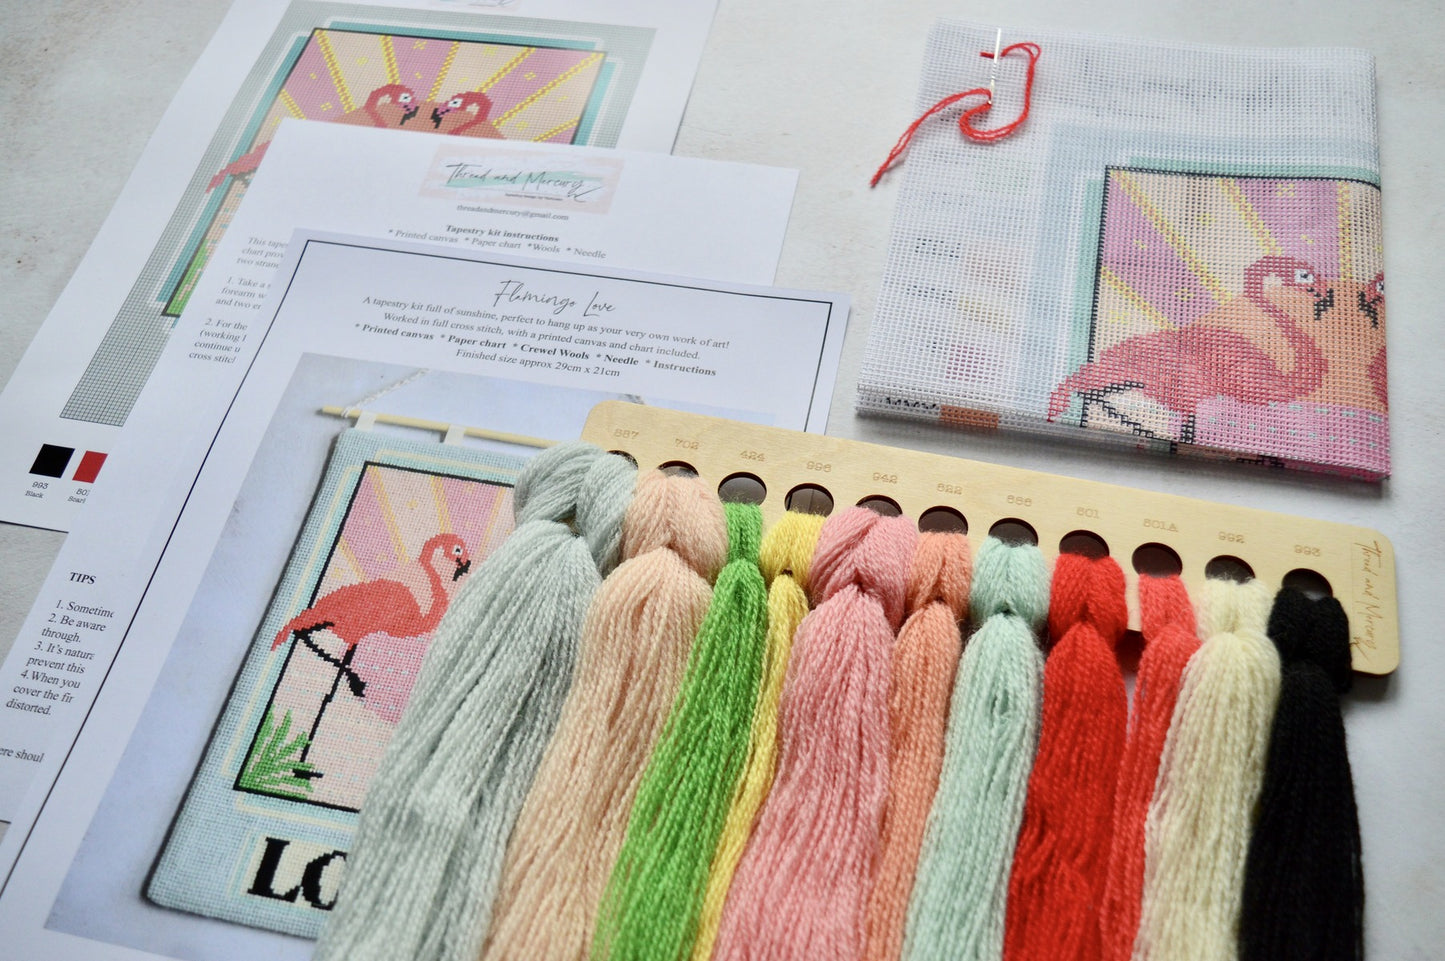 An image of a tapestry kit with wool threads and a printed canvas. The canvas depicts a flamingo design ready for stitching. The kit provides all necessary materials for creating a textured and colourful tapestry masterpiece